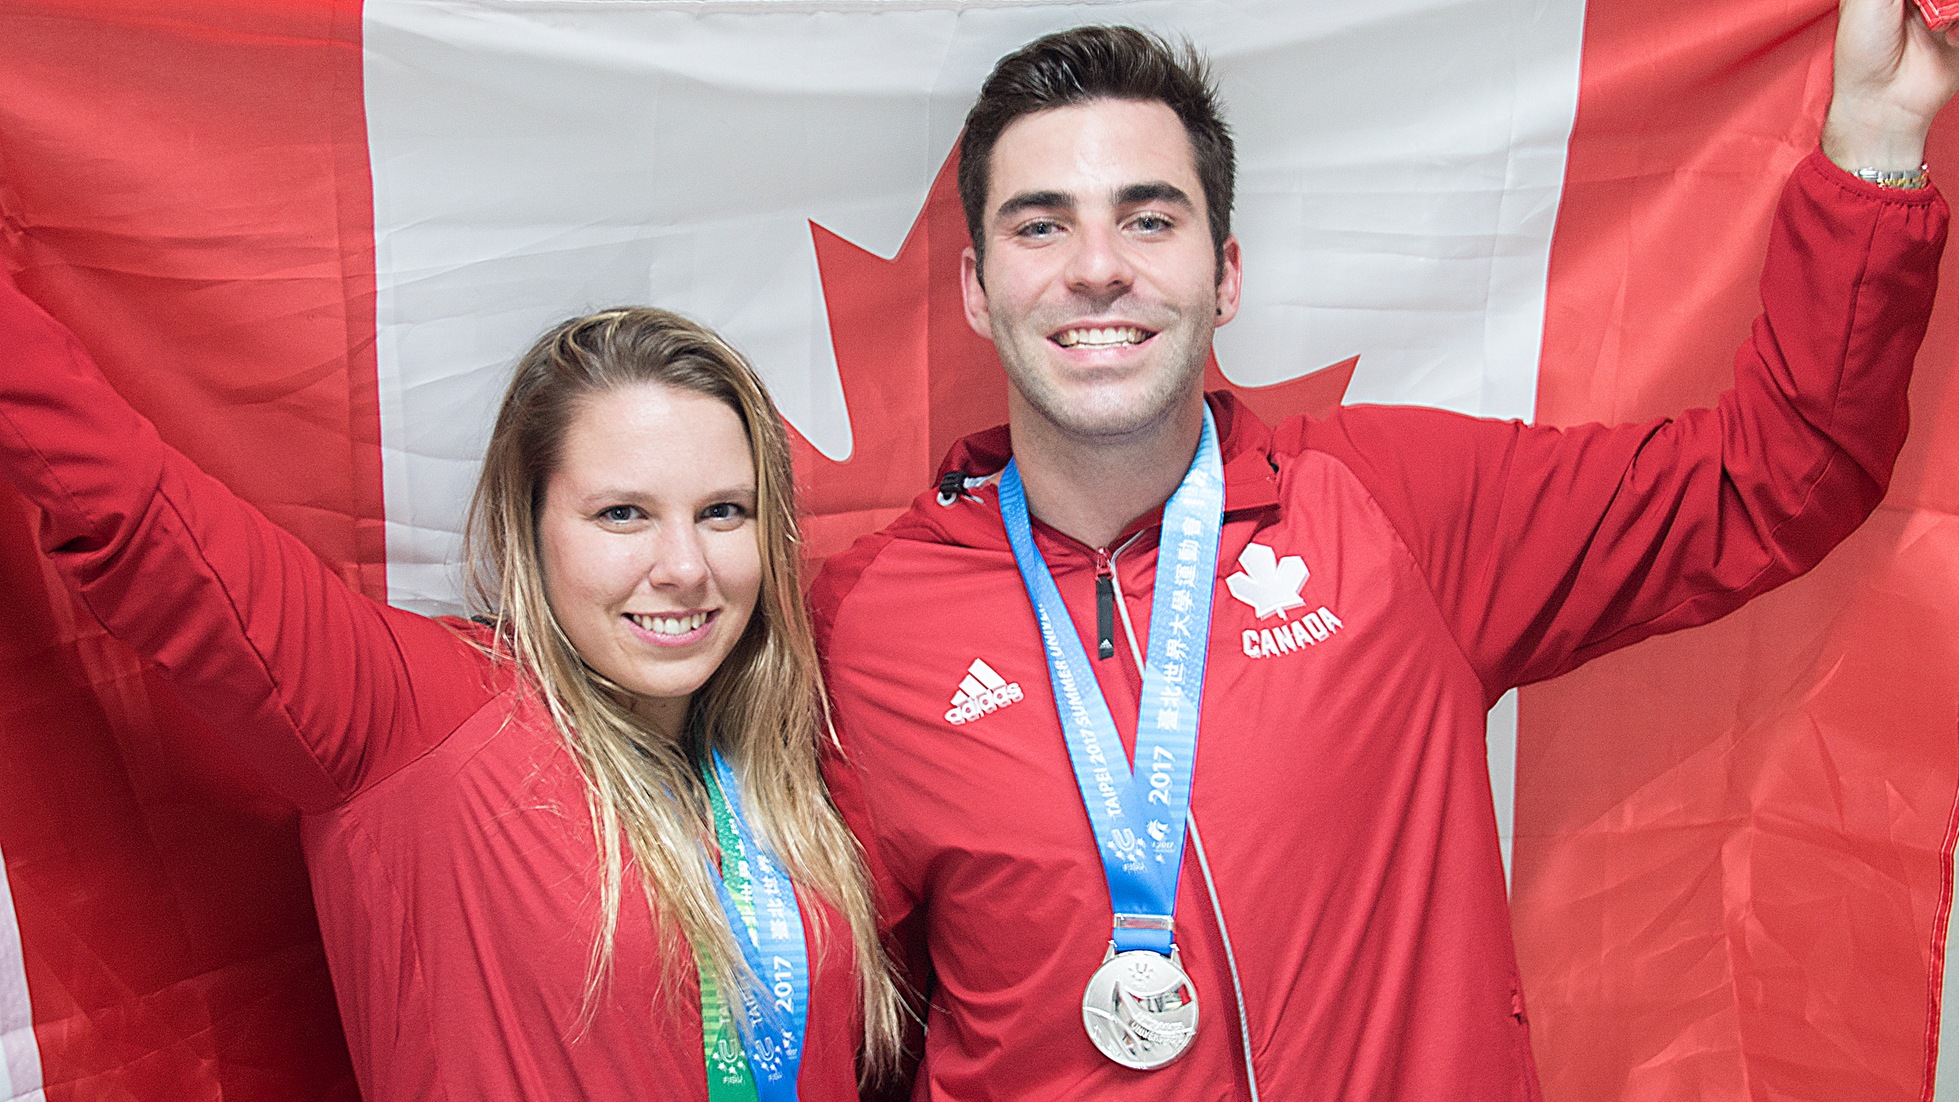 Christopher Cameron / Celina Toth and Tyler Henschel pose with their medals at the 2017 Summer Universiade in Taipei. The duo won the mixed team event to wrap up the diving competition in Taipei.